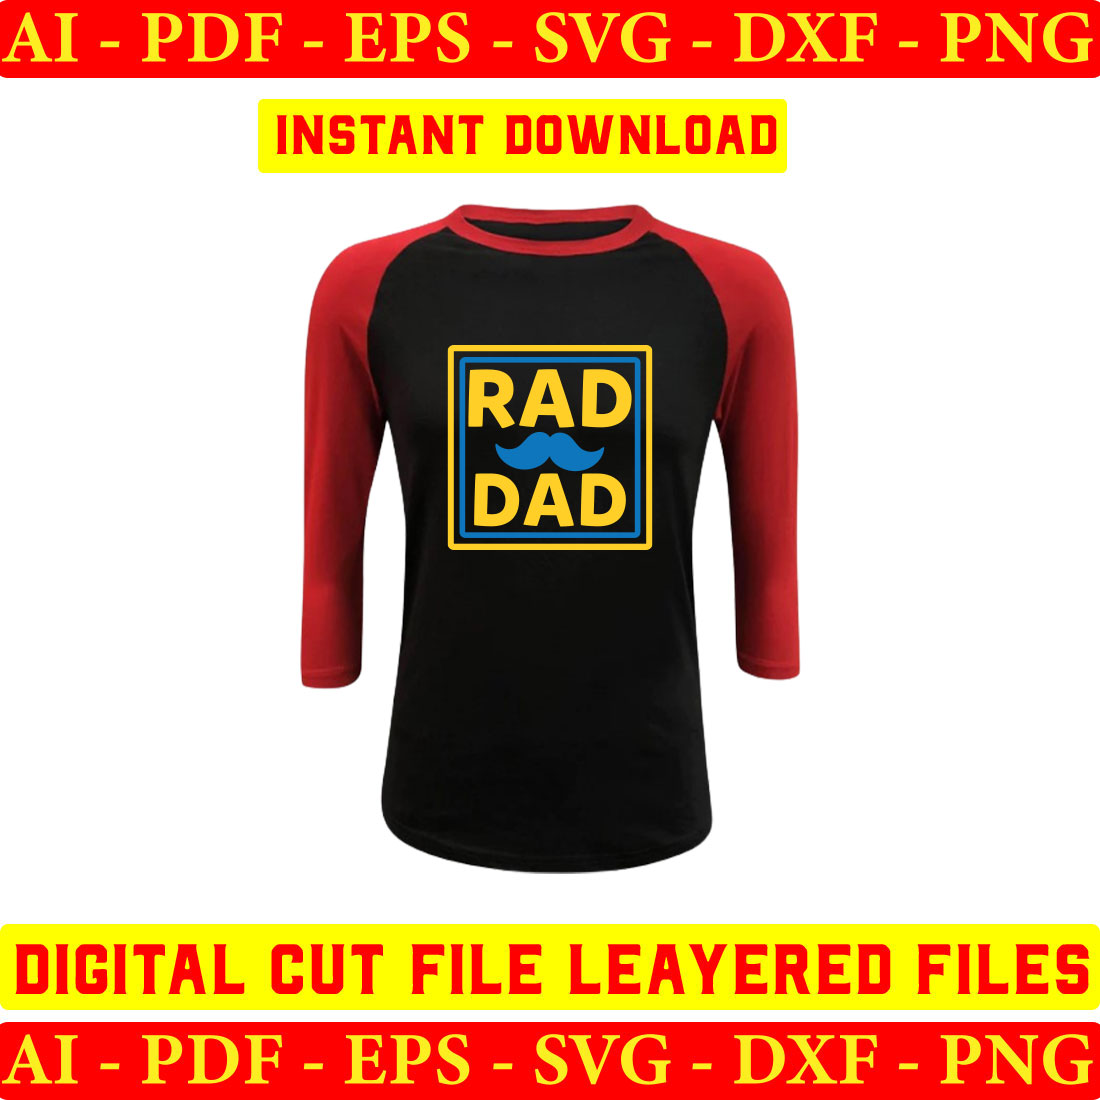 Black and red shirt with the words rad dad on it.